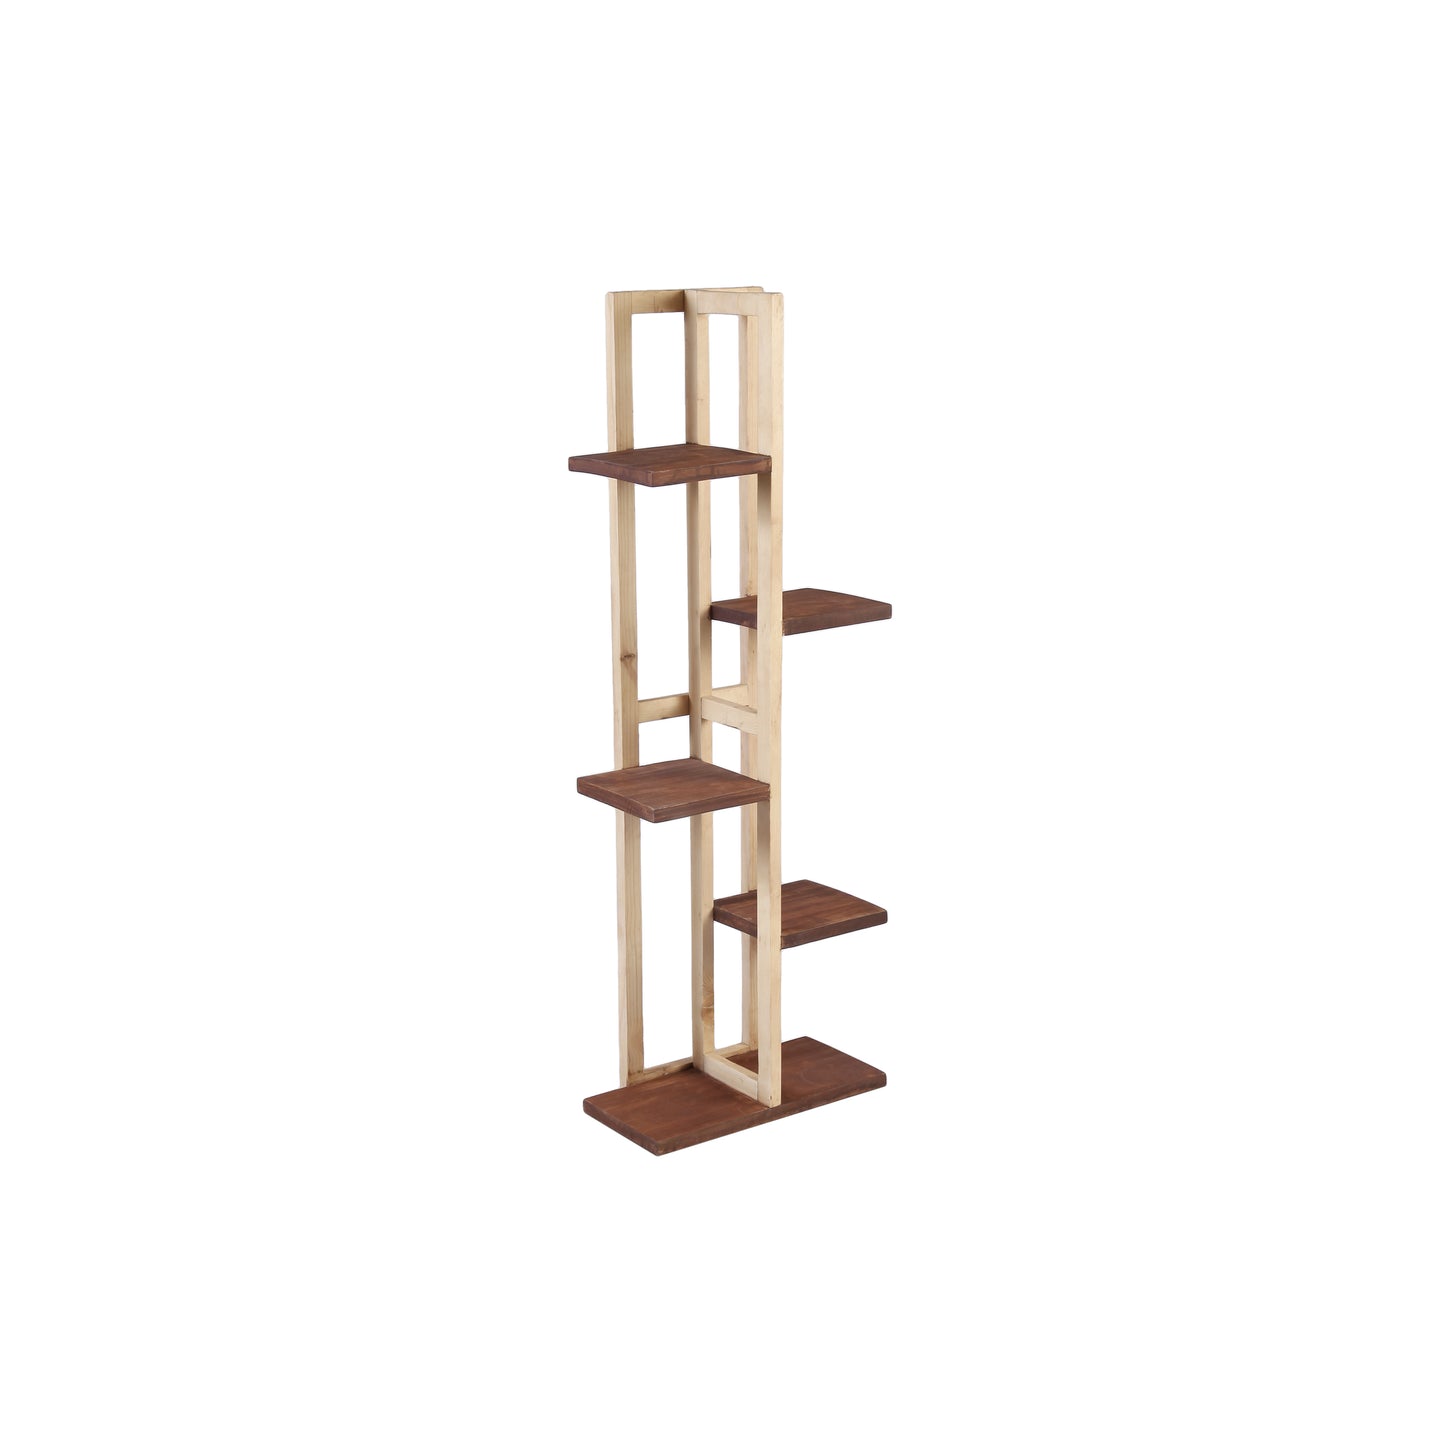 A Tiny Mistake All Purpose Five Tier Stand (One Piece) (For Planters, Ornaments and Accessories) (Natural Pine Wood Stand with Dark Planks)